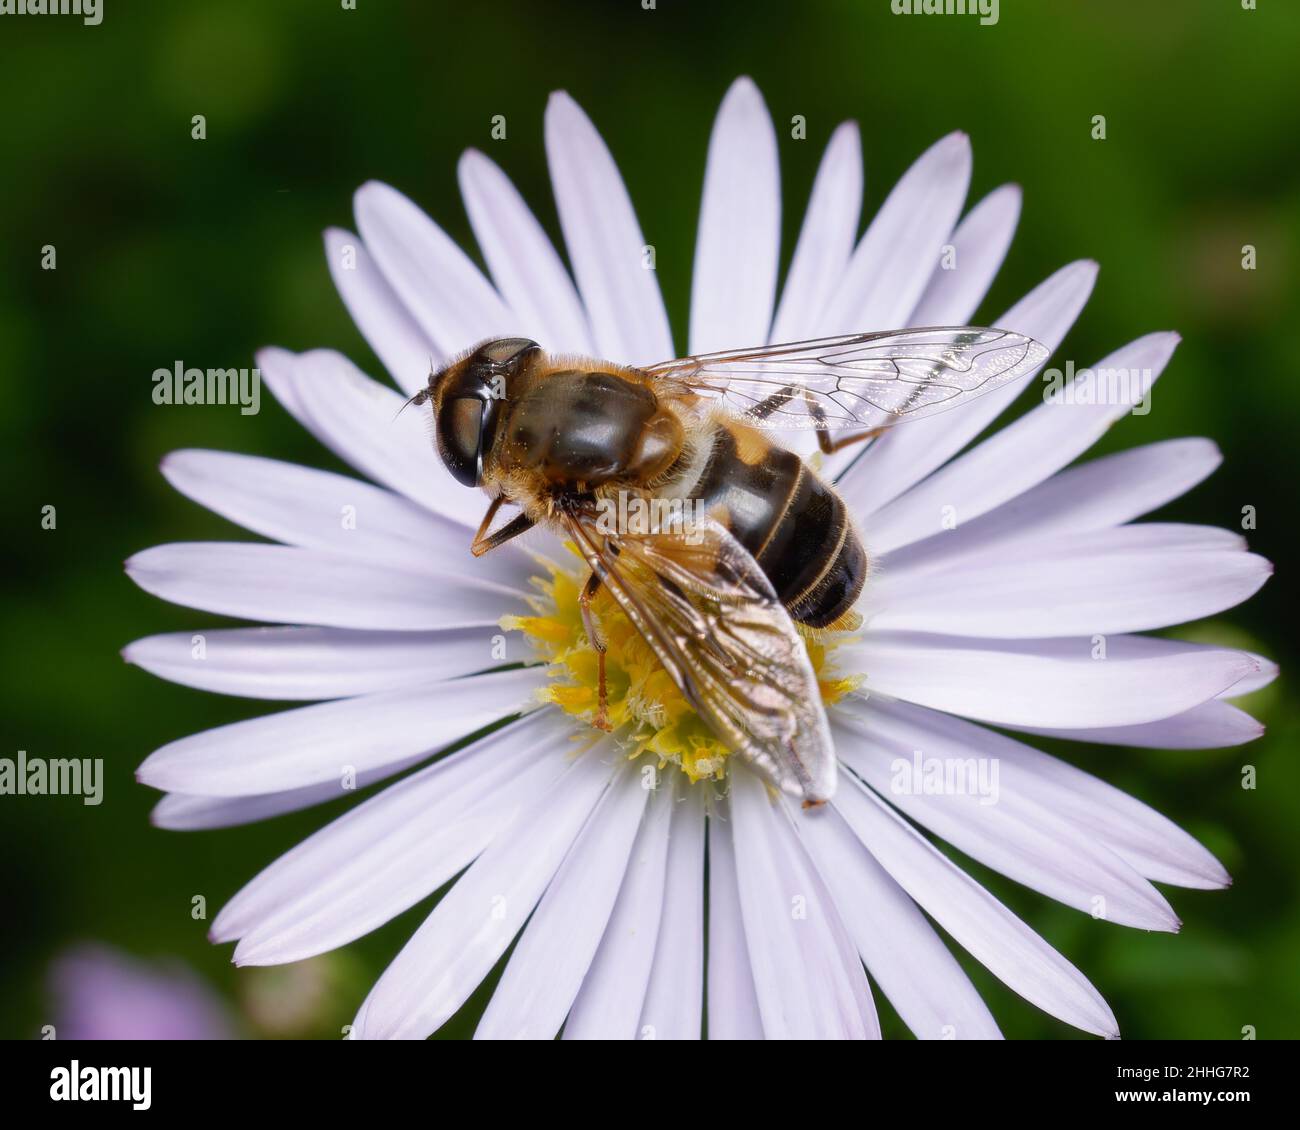 Tapered Drone Fly on an Oxeye daisy Stock Photo